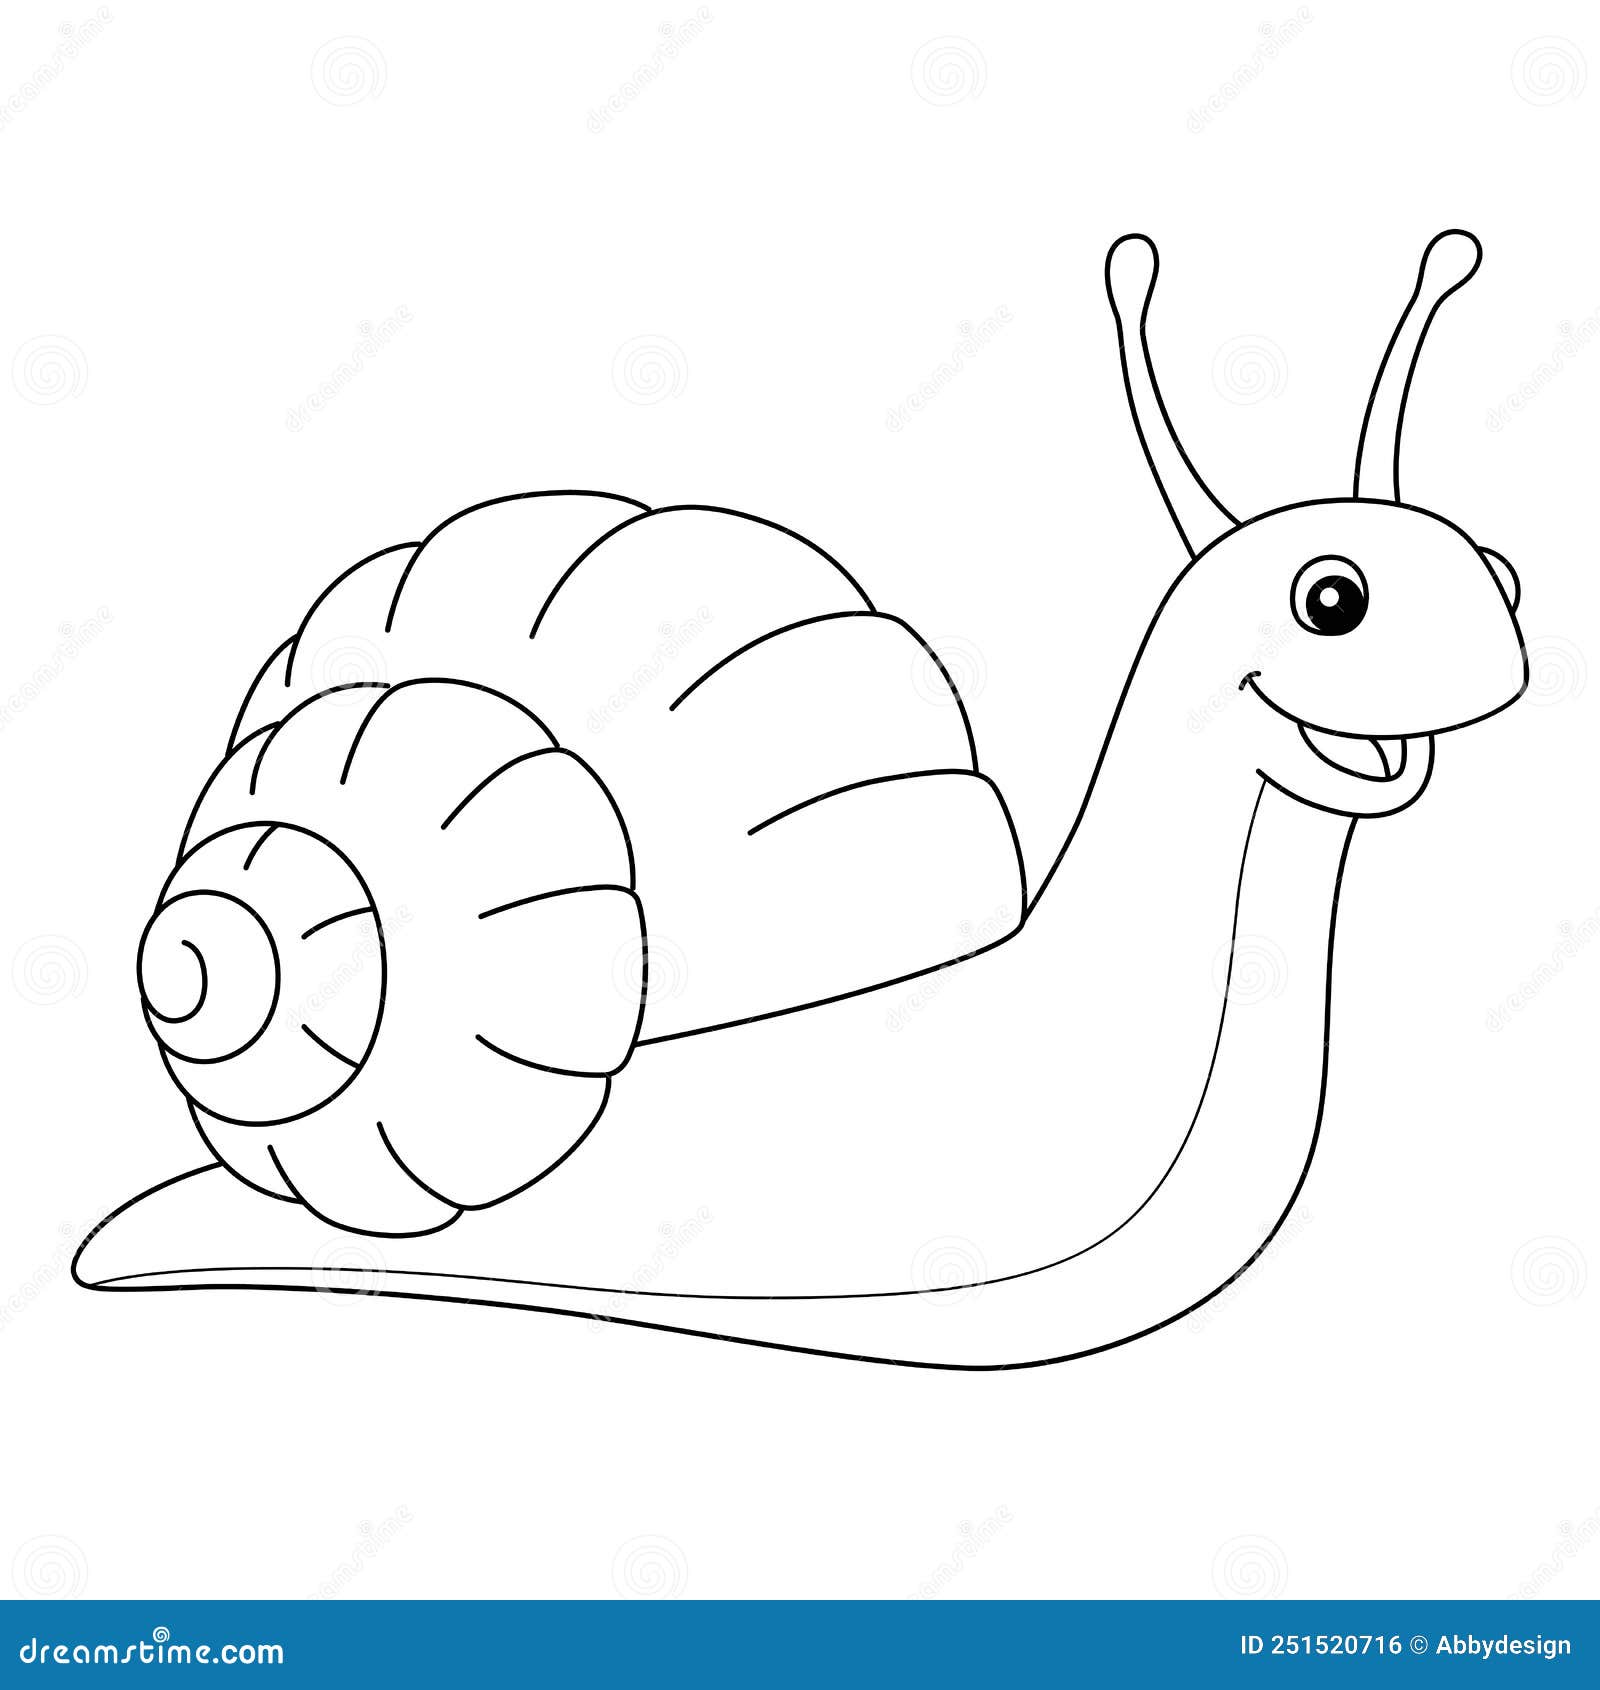 Snail animal coloring page for kids stock vector